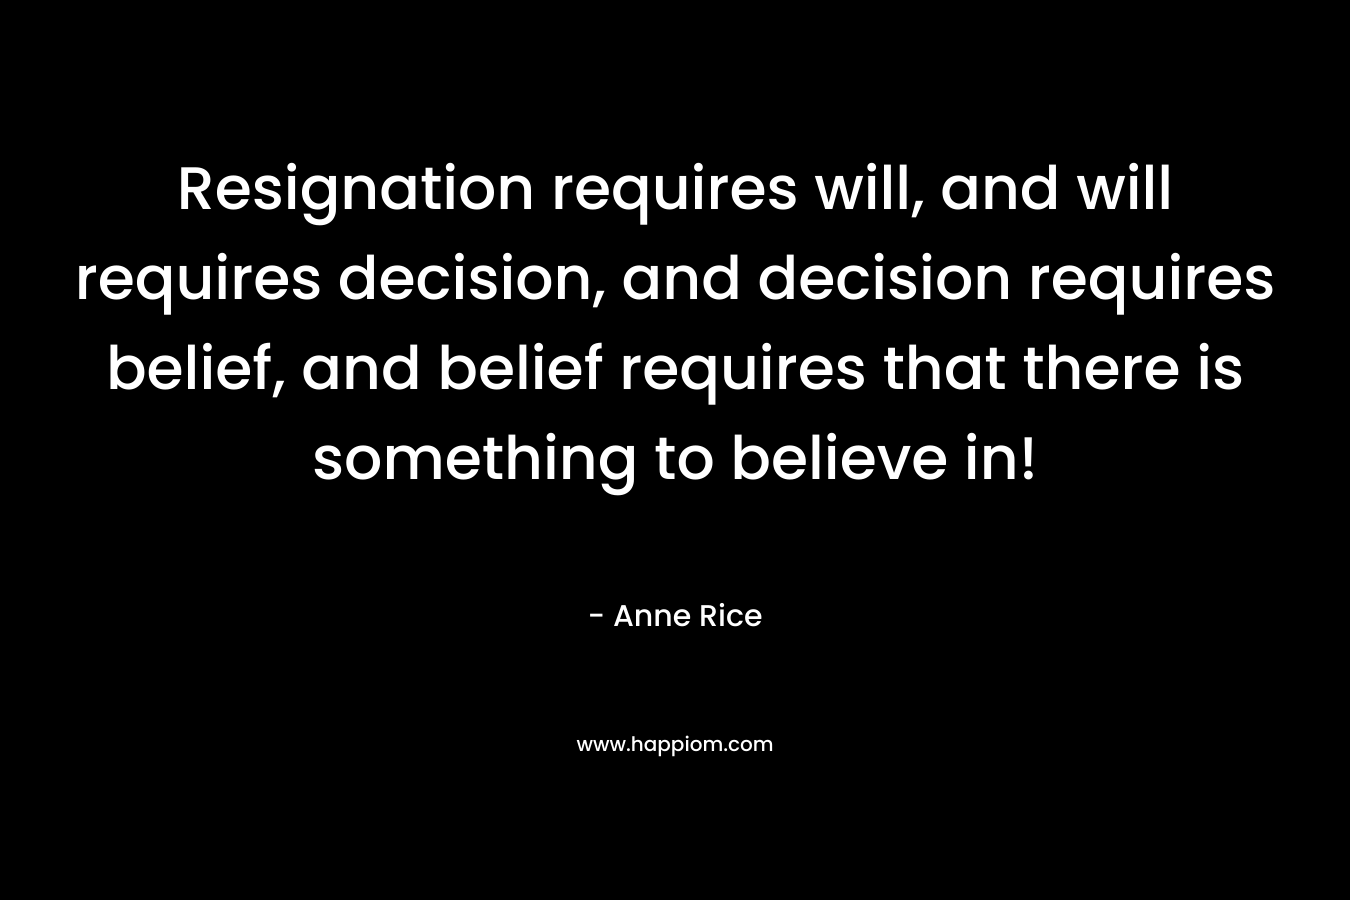 Resignation requires will, and will requires decision, and decision requires belief, and belief requires that there is something to believe in!